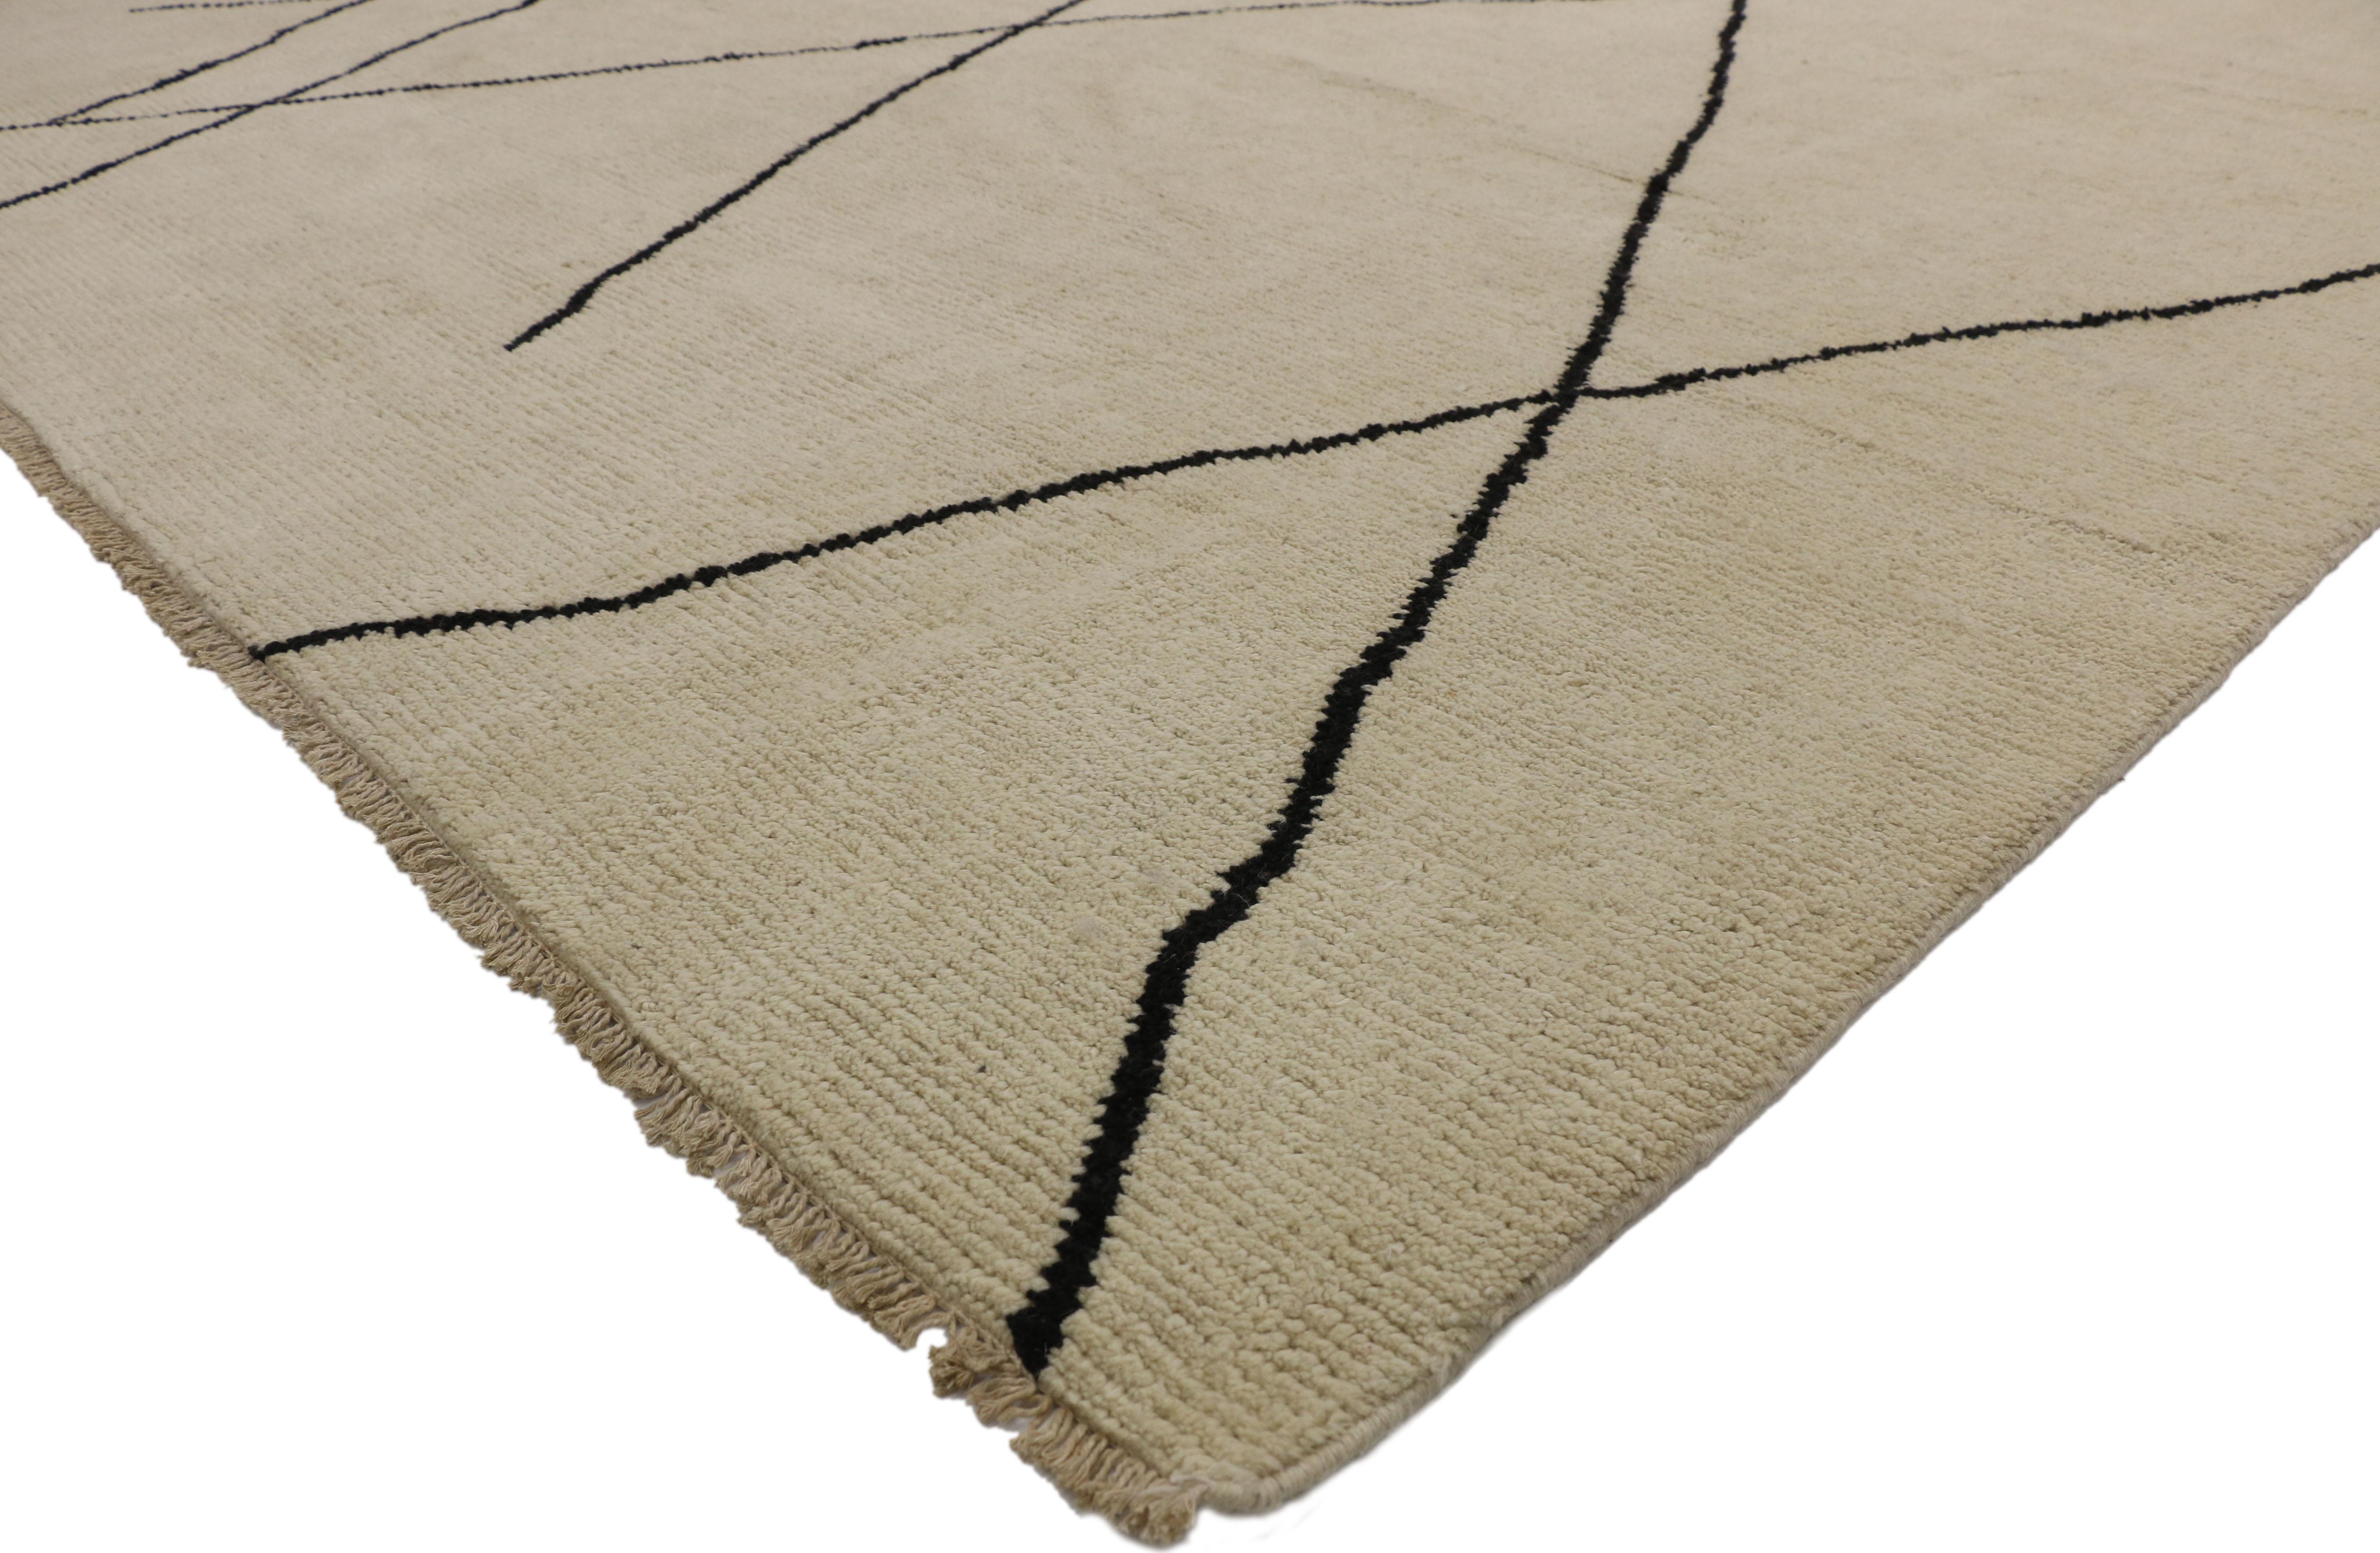 80500, new contemporary Moroccan area rug with modernist style. This hand knotted wool contemporary Moroccan area rug features contrasting black lines running the length of the sandy-beige backdrop. The thin black lines crisscross in an organic